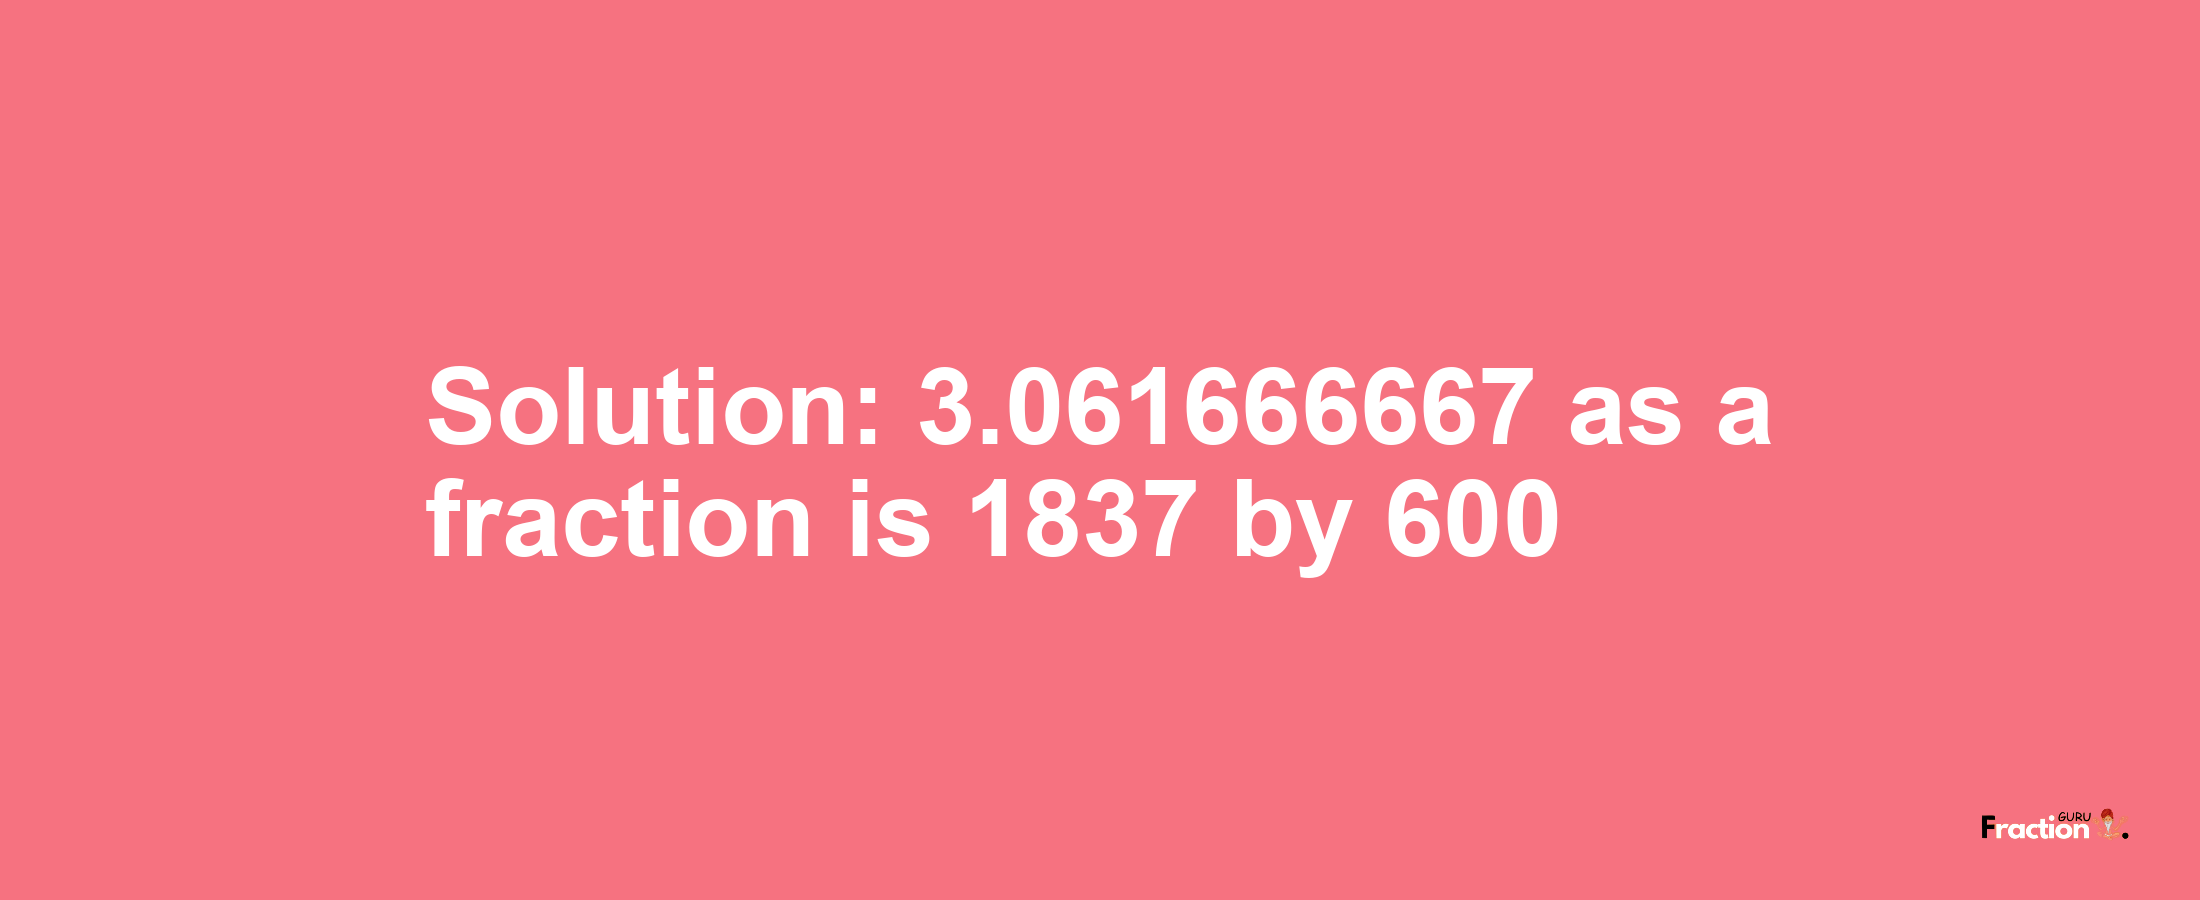 Solution:3.061666667 as a fraction is 1837/600